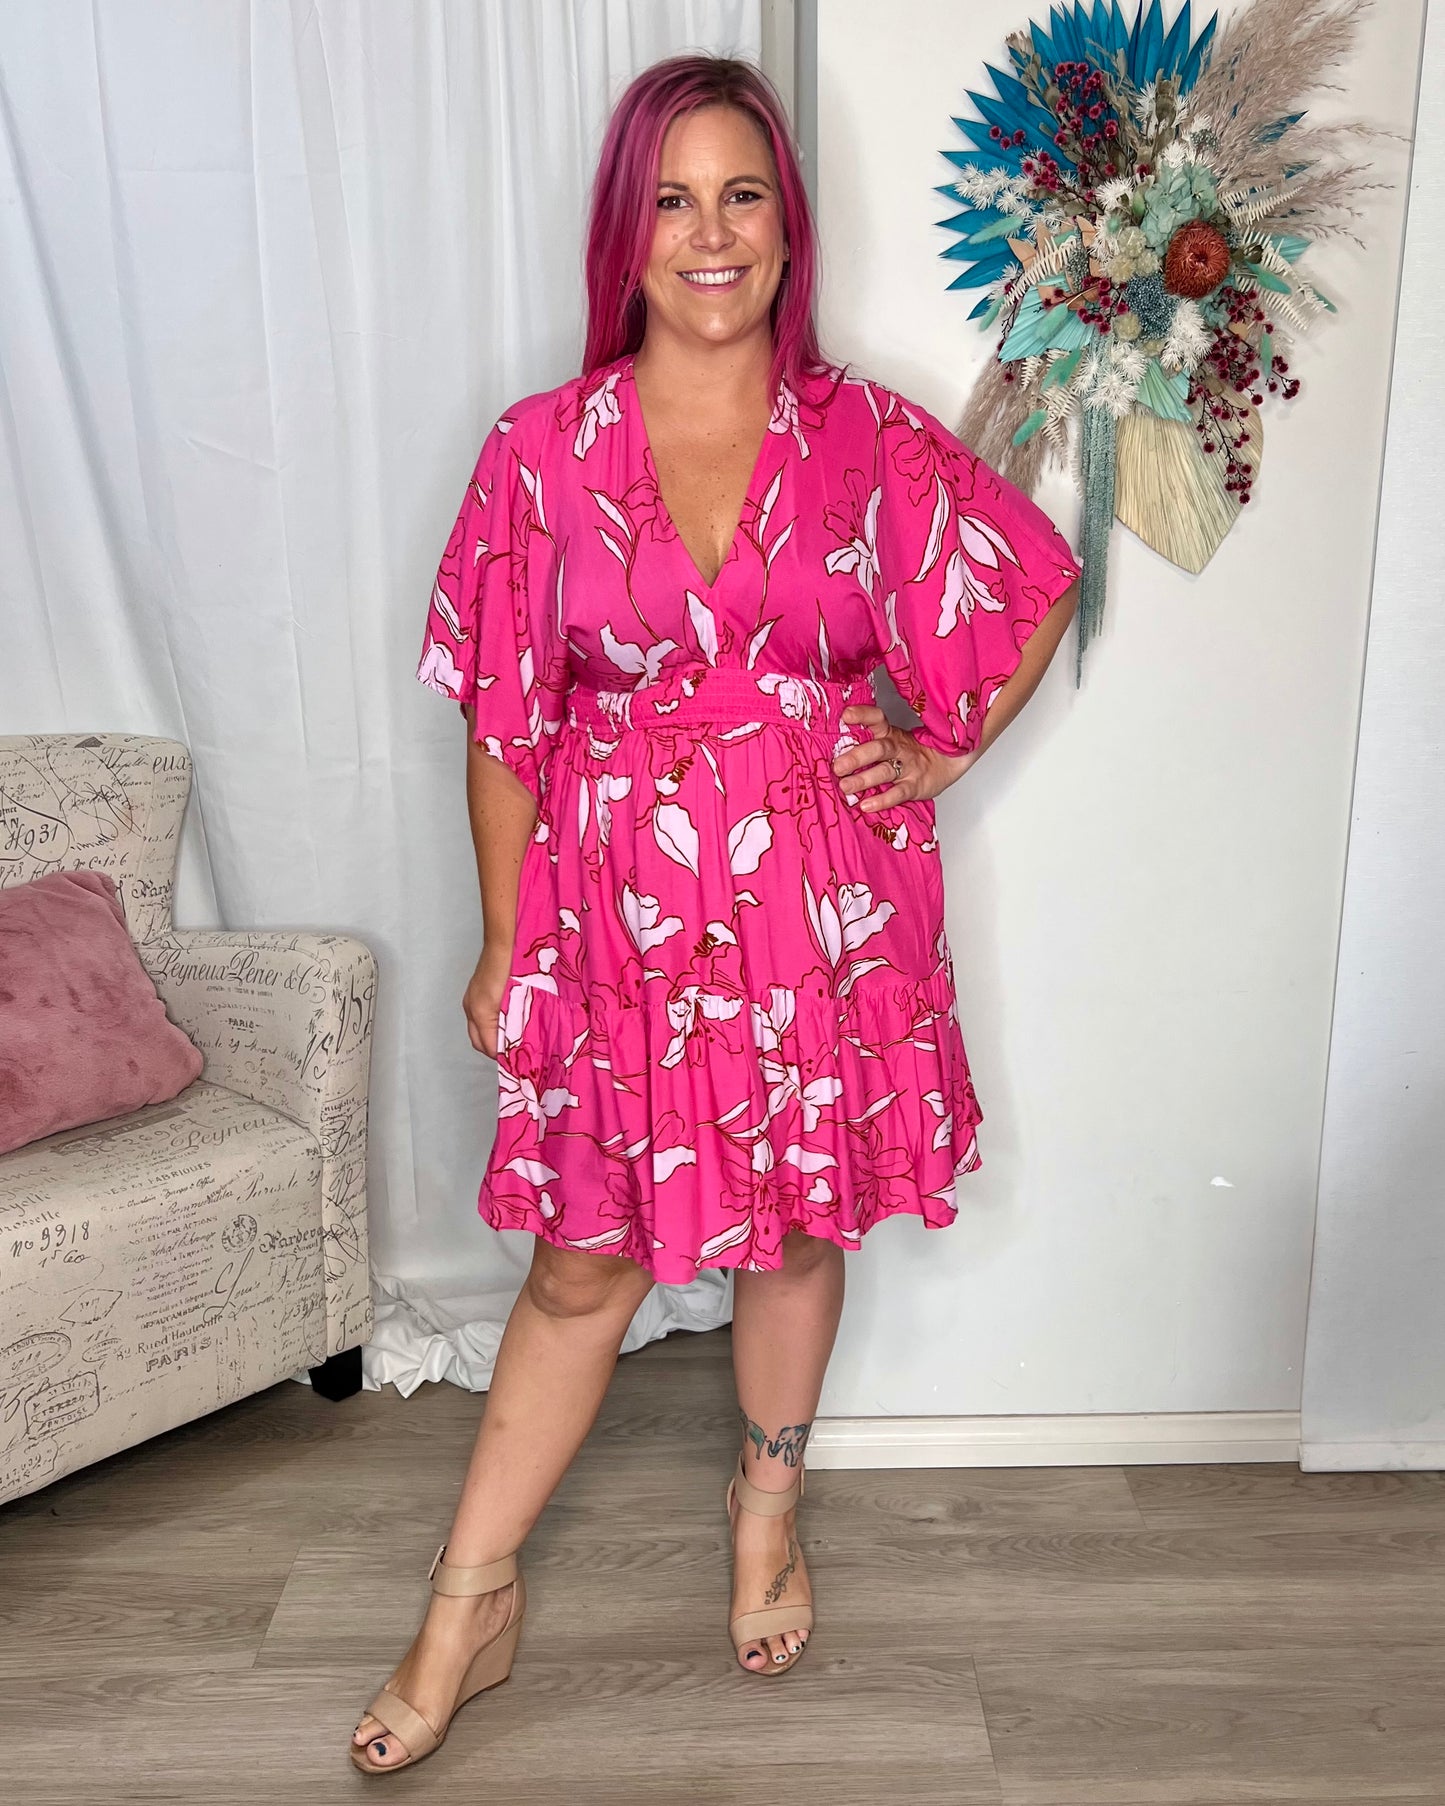 ***NEW*** Kali Mini Dress: Kali is a super cute mini dress with balloon sleeves and a super cute neckline, making it an easy chuck on and go that will make you look amazing
Features:

Shirred  - Ciao Bella Dresses 